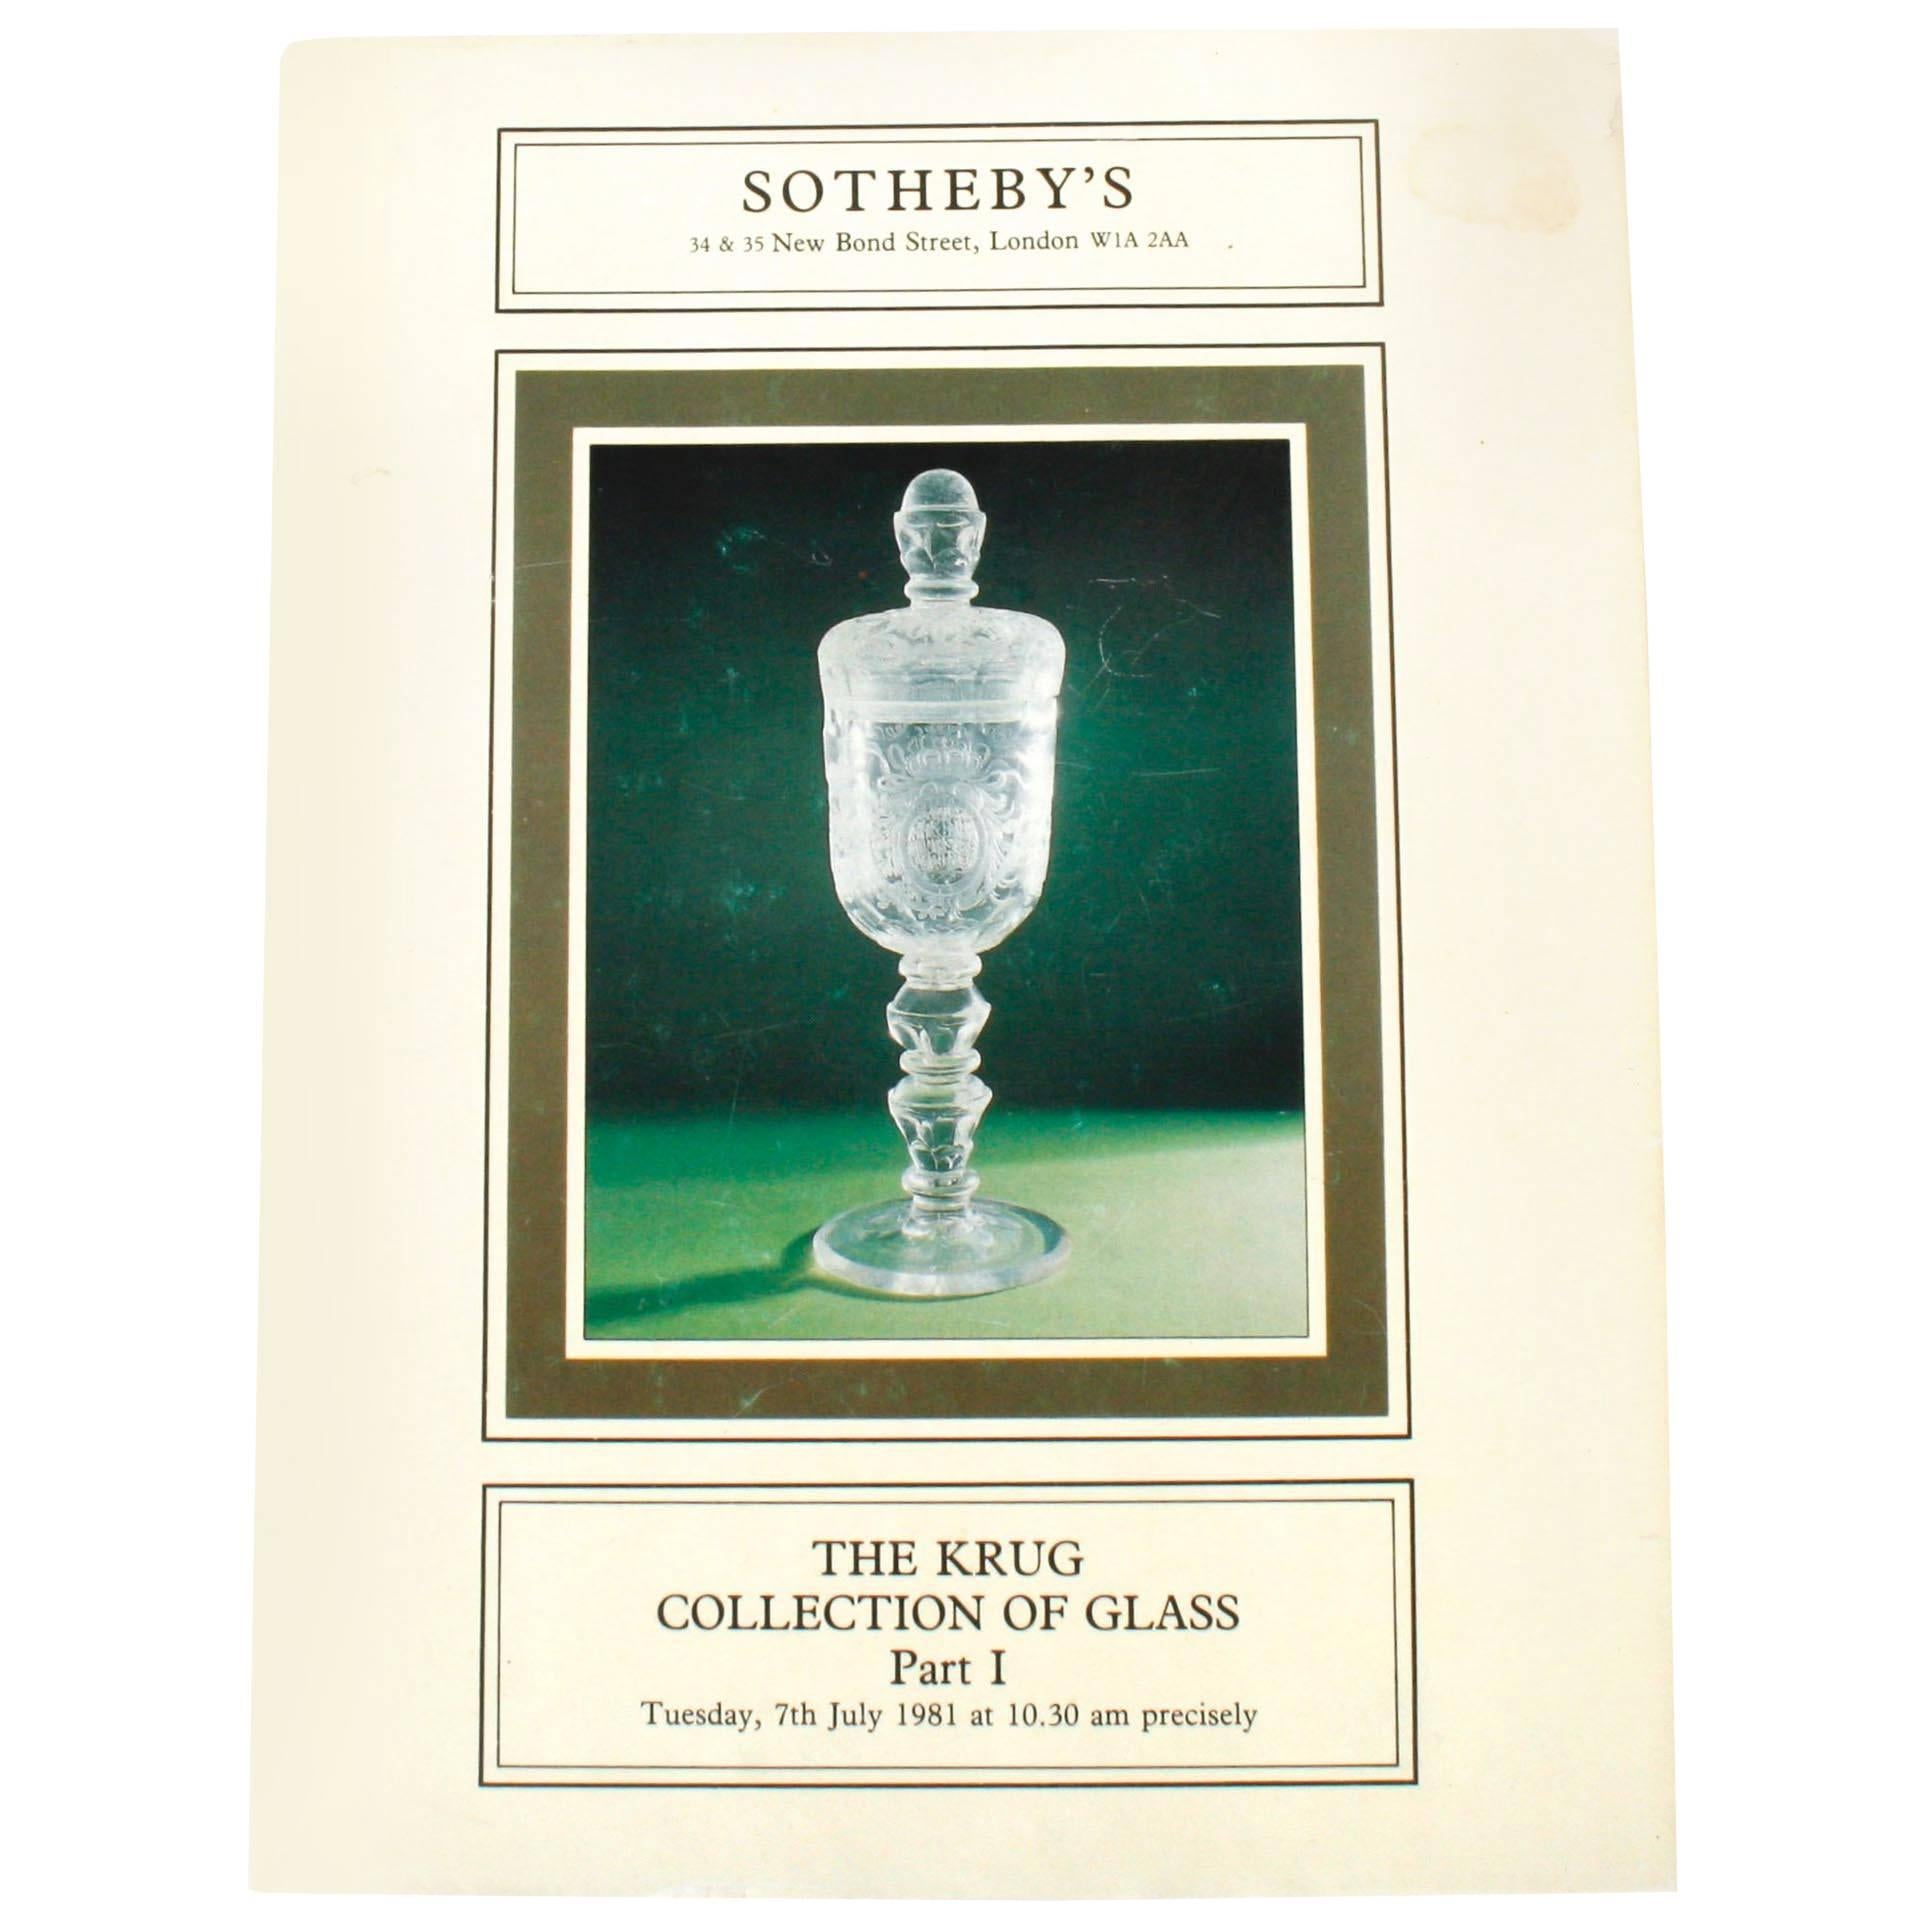 Sotheby's Auction Catalogue for The Krug Collection of Glass Part I